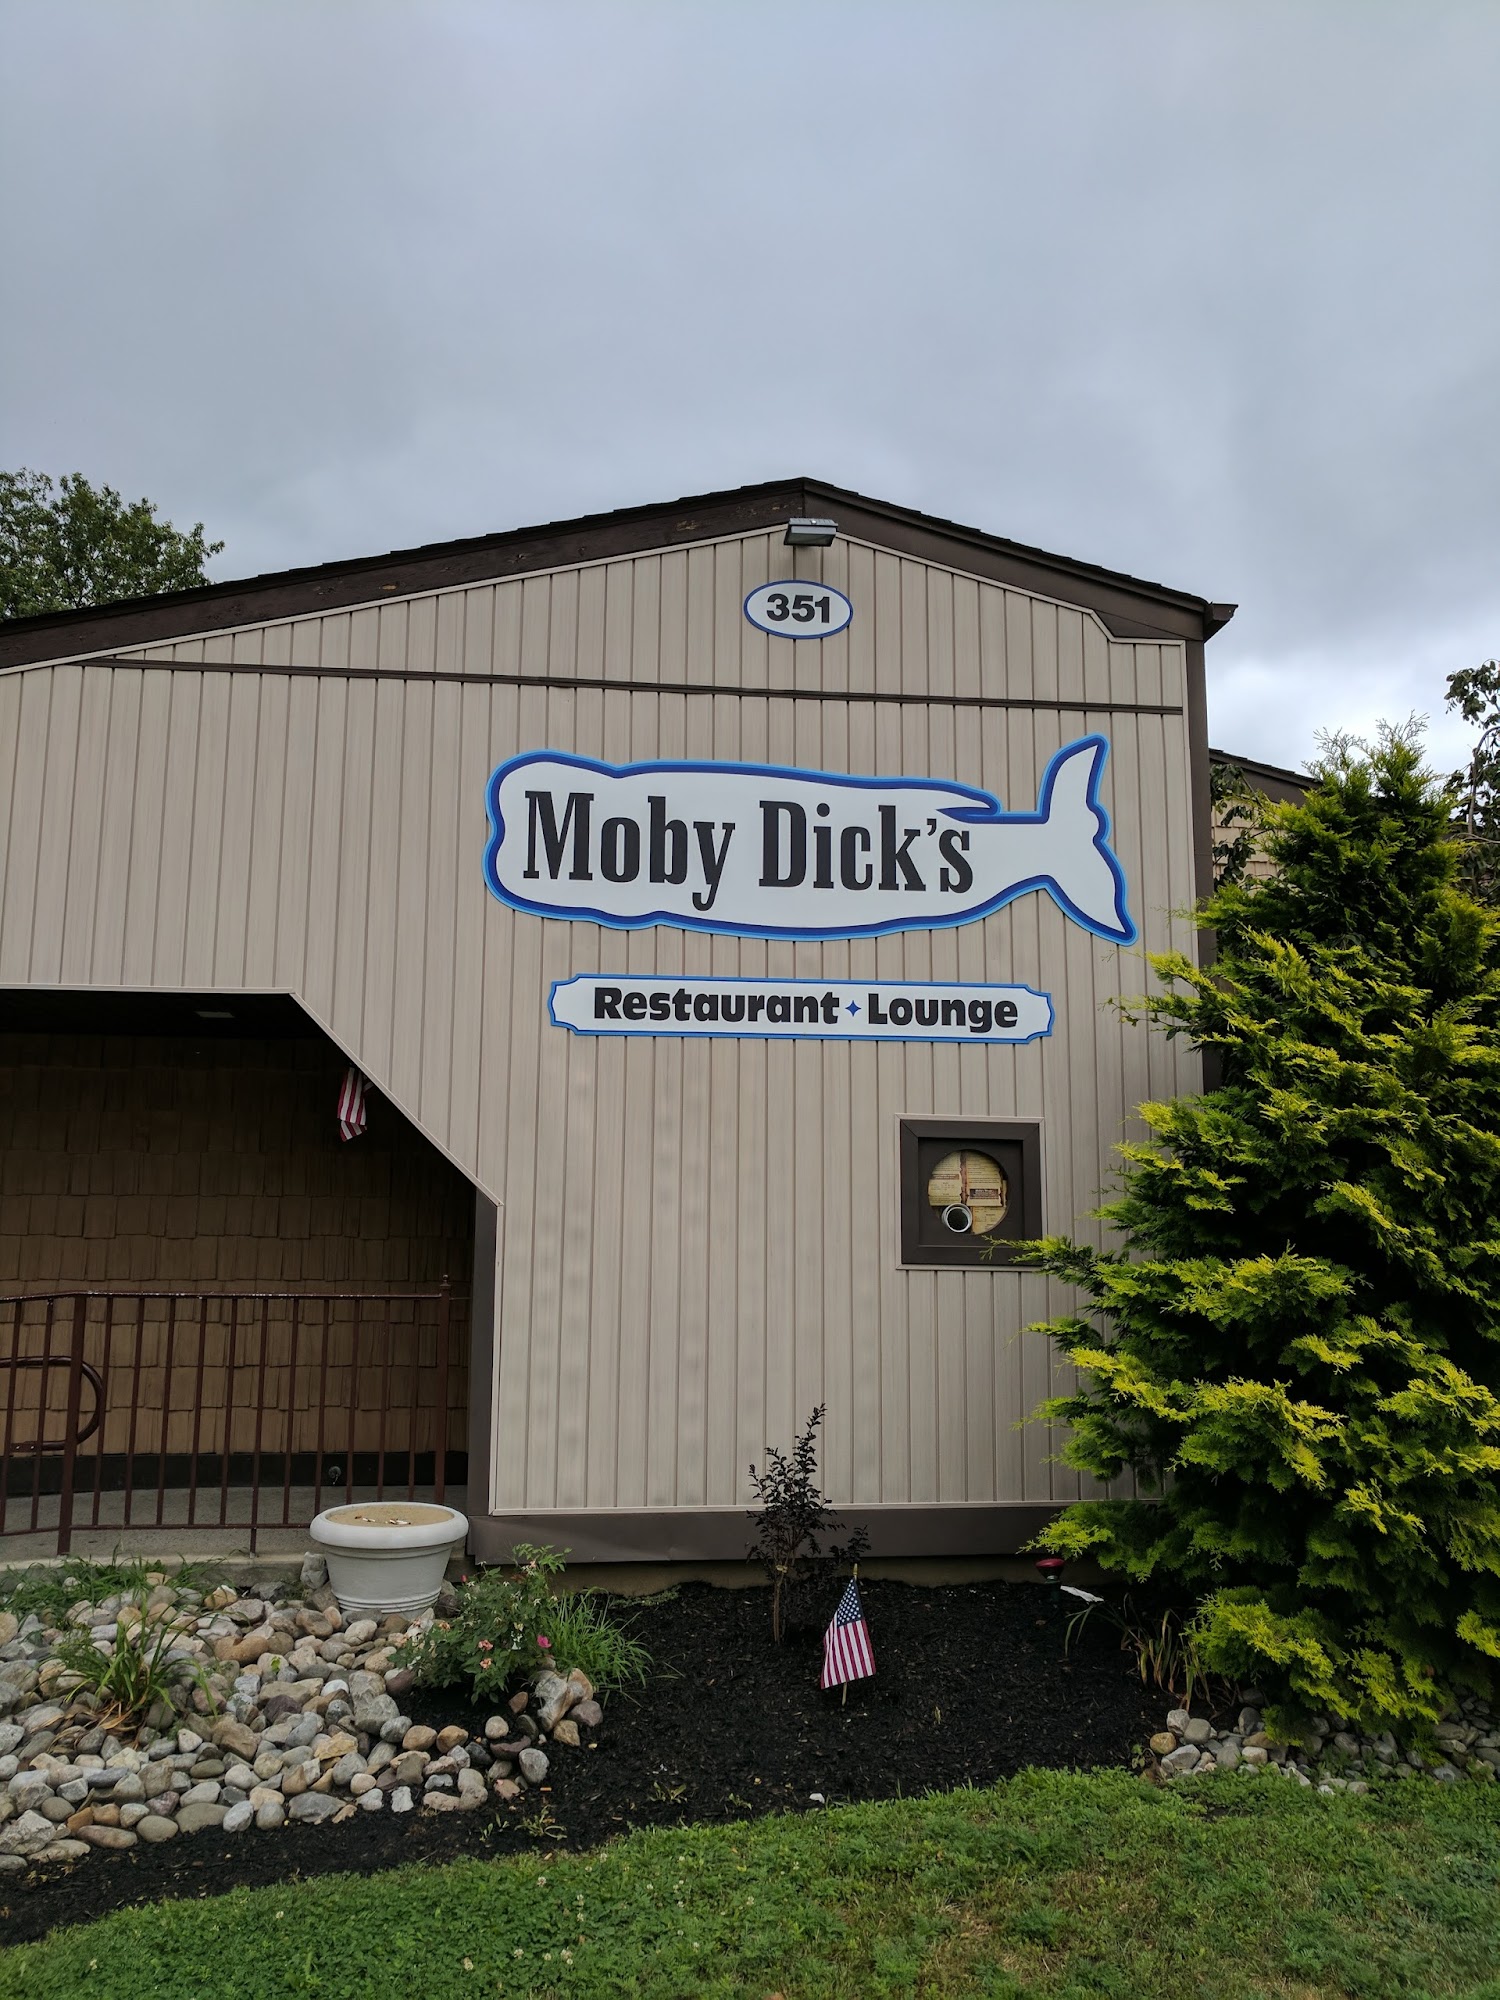 Moby Dick's Restaurant Lounge